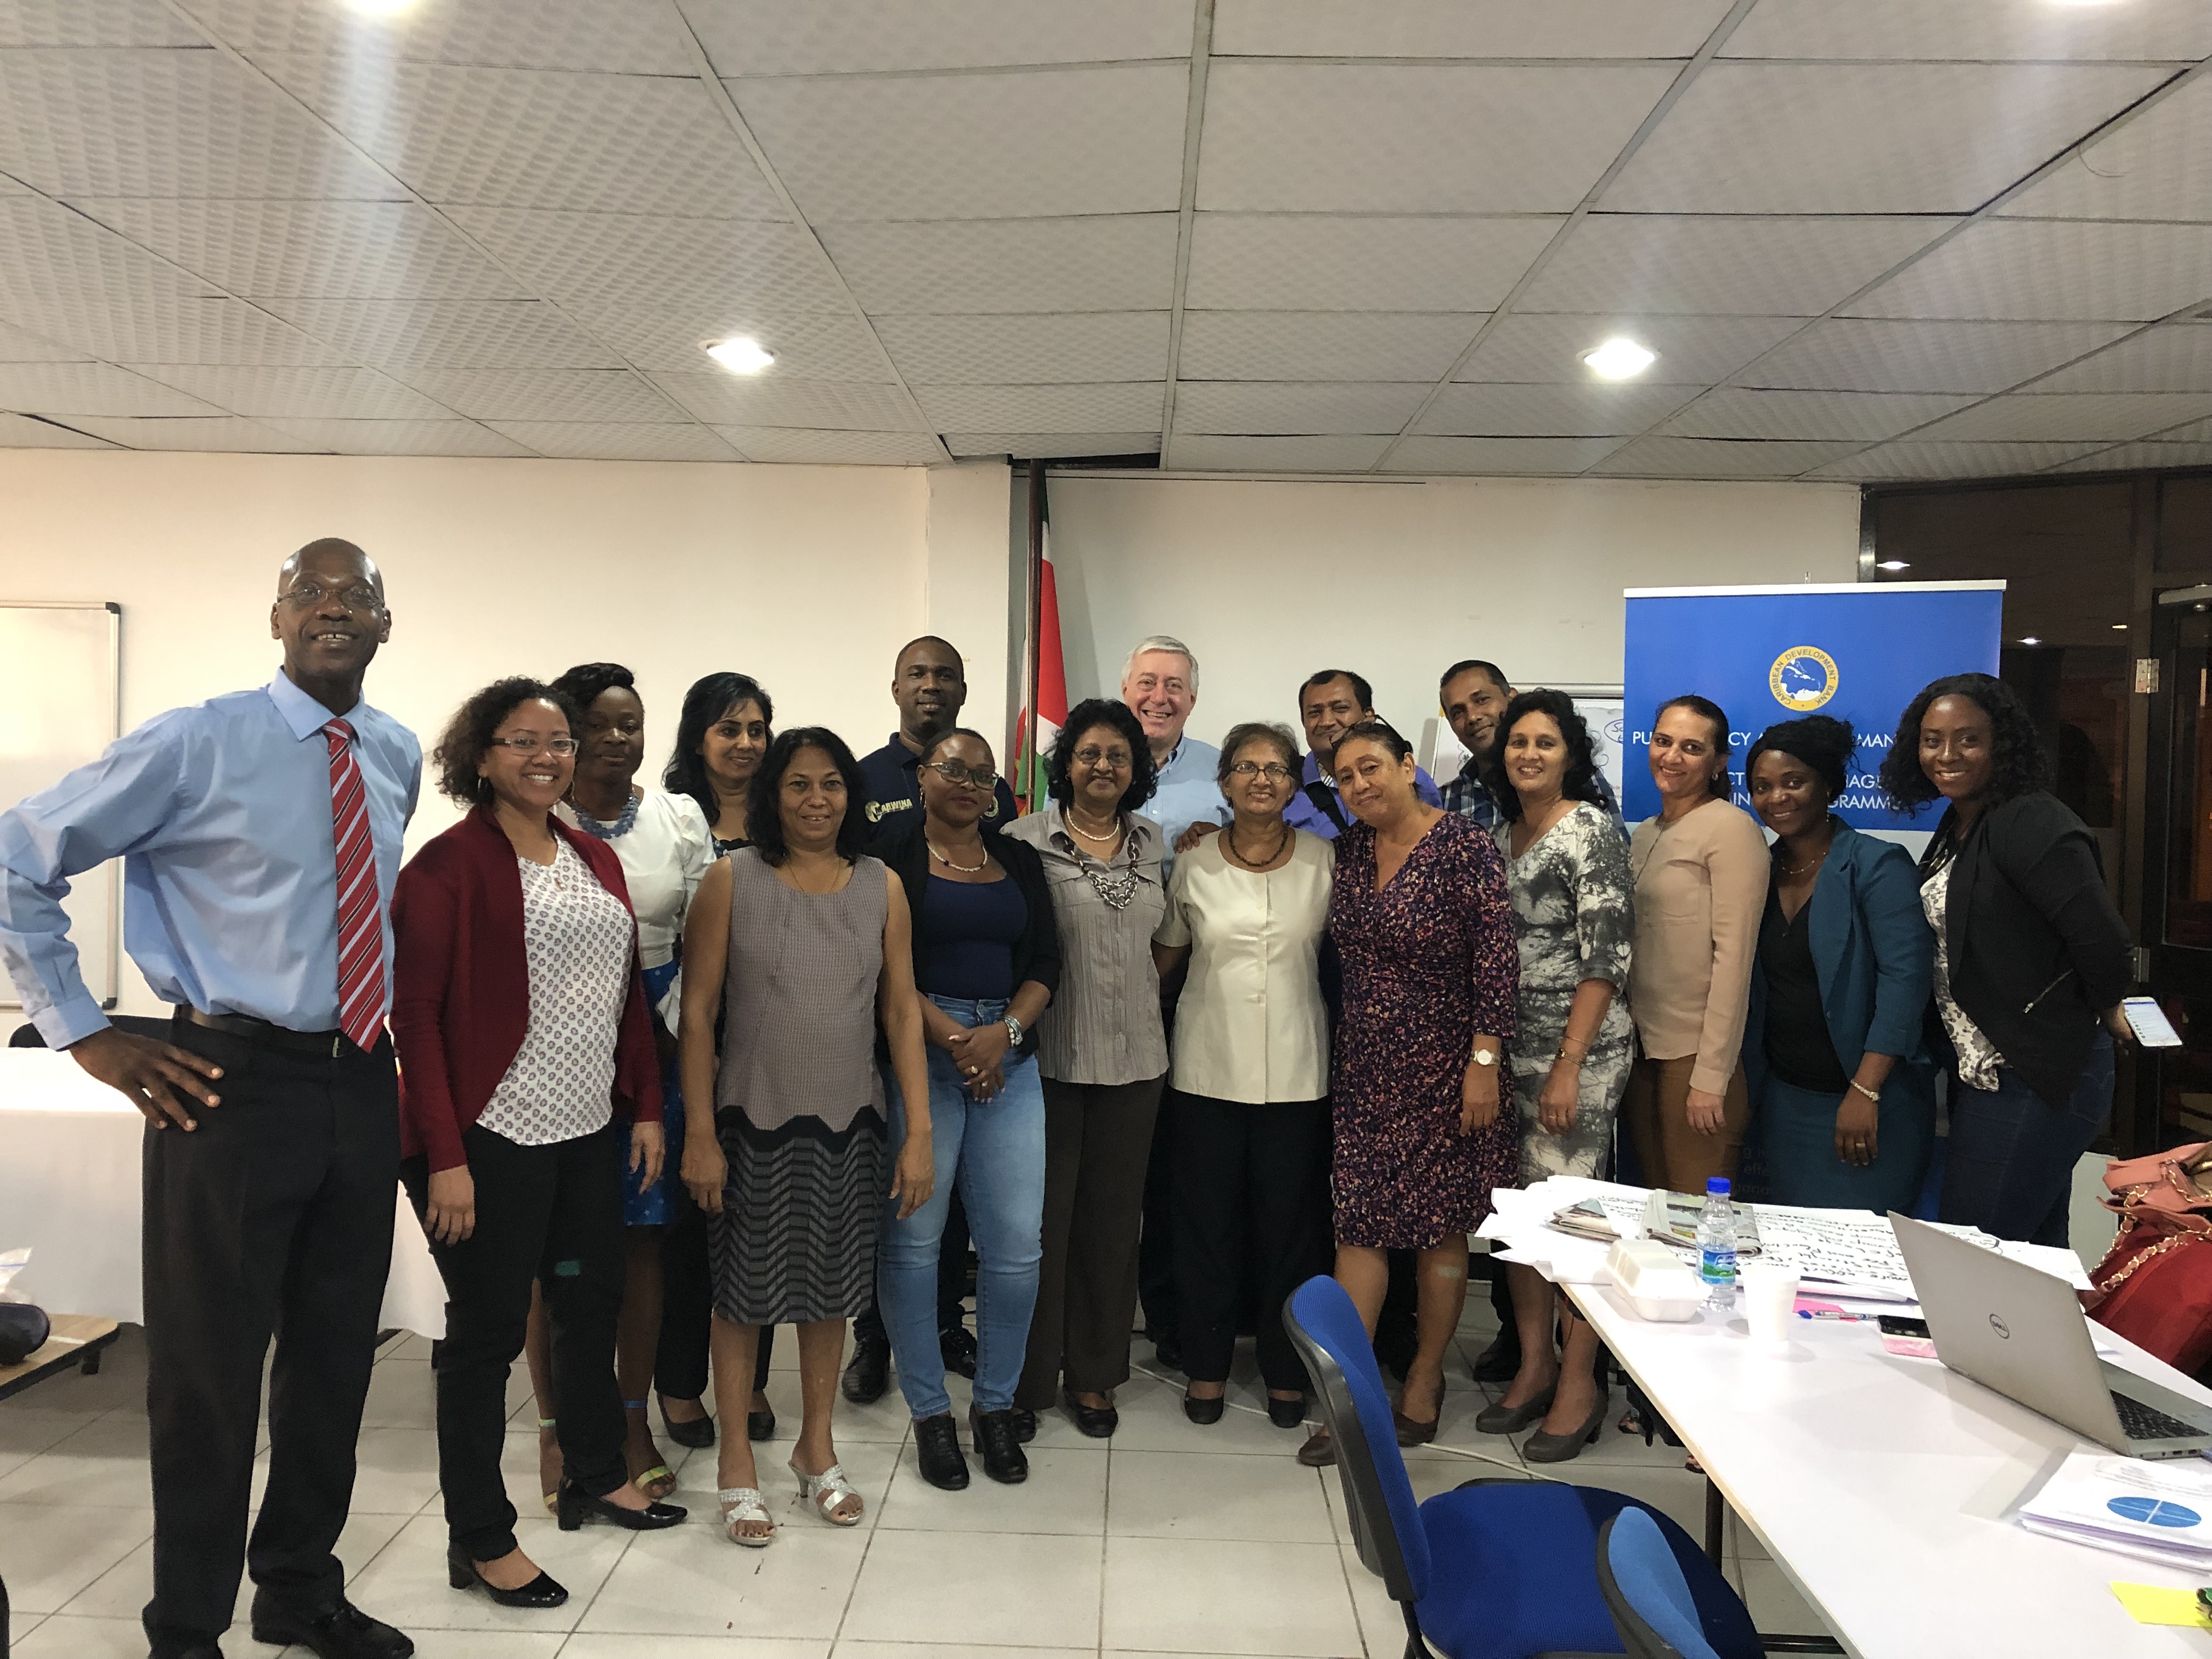 Group photo of the participants in the PPAM-PCM training in Suriname in May 2019